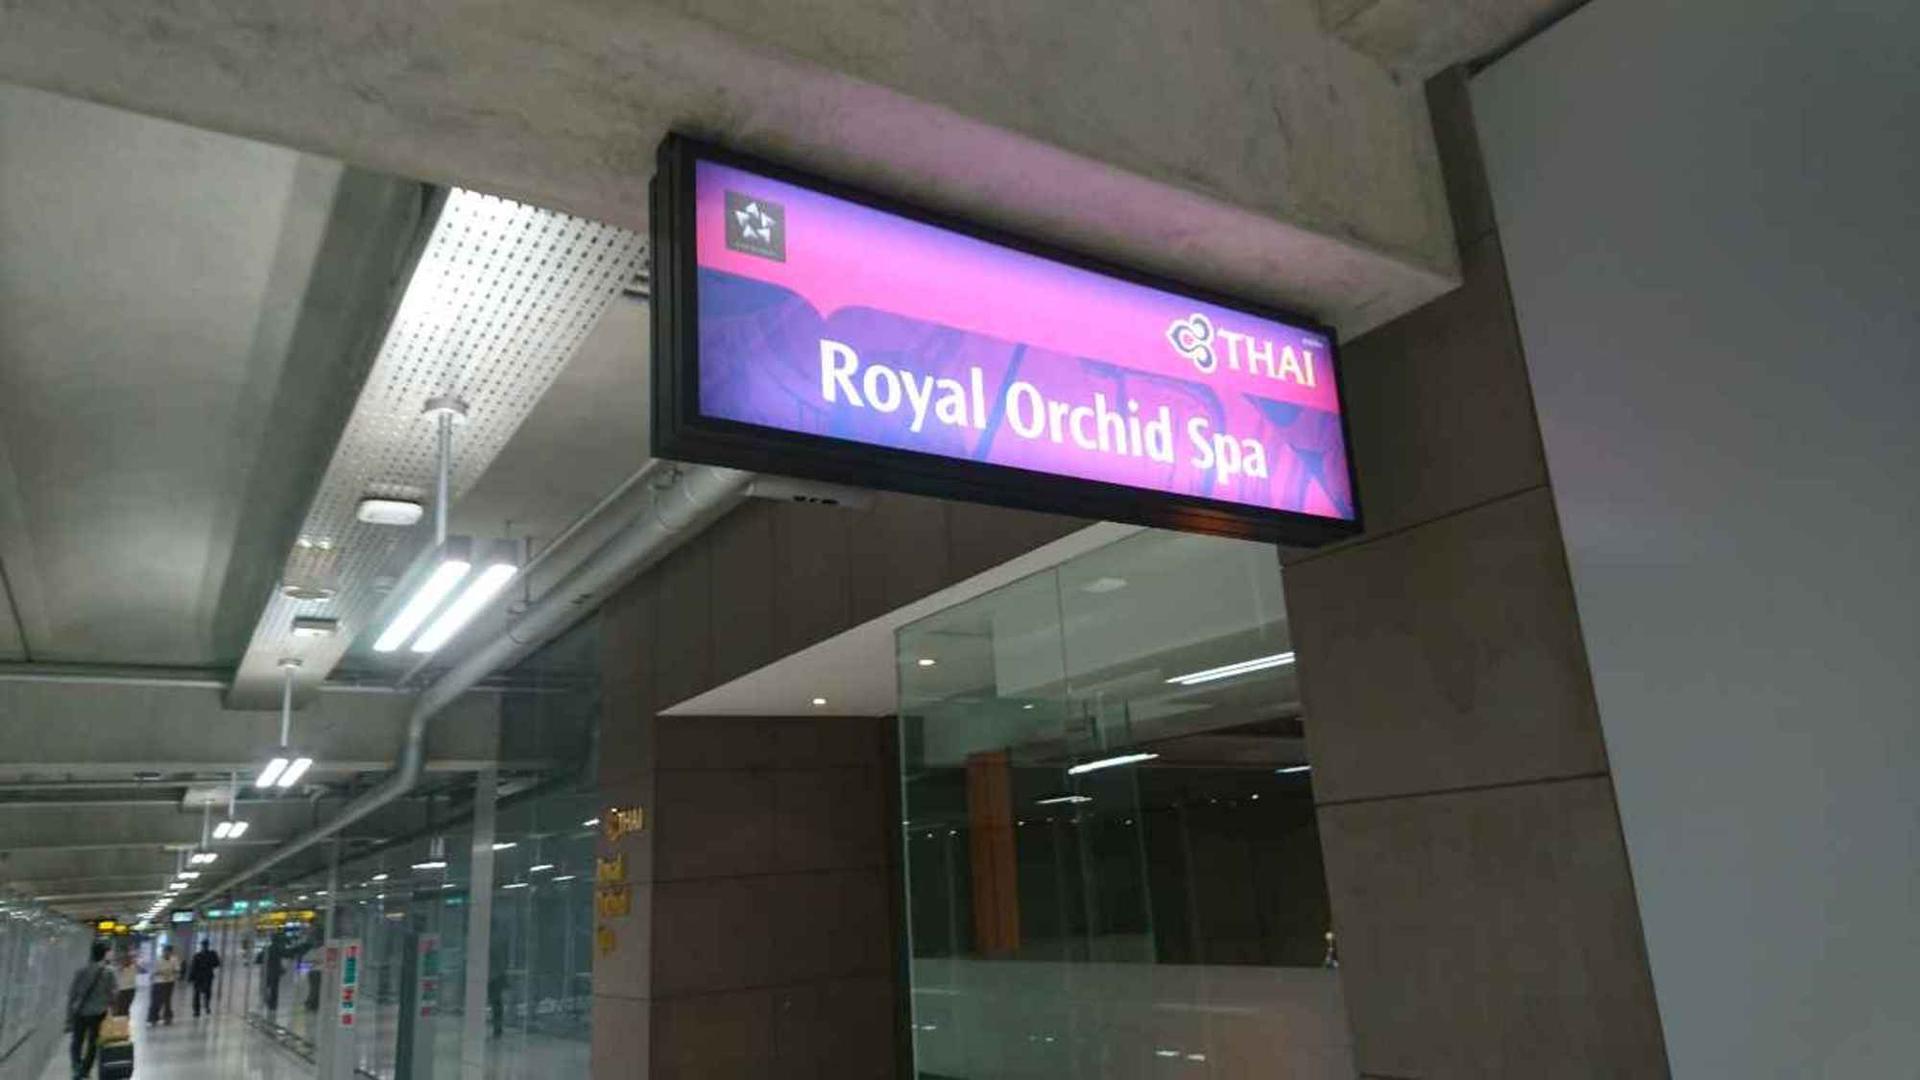 Thai Airways Royal Orchid Spa  image 21 of 25